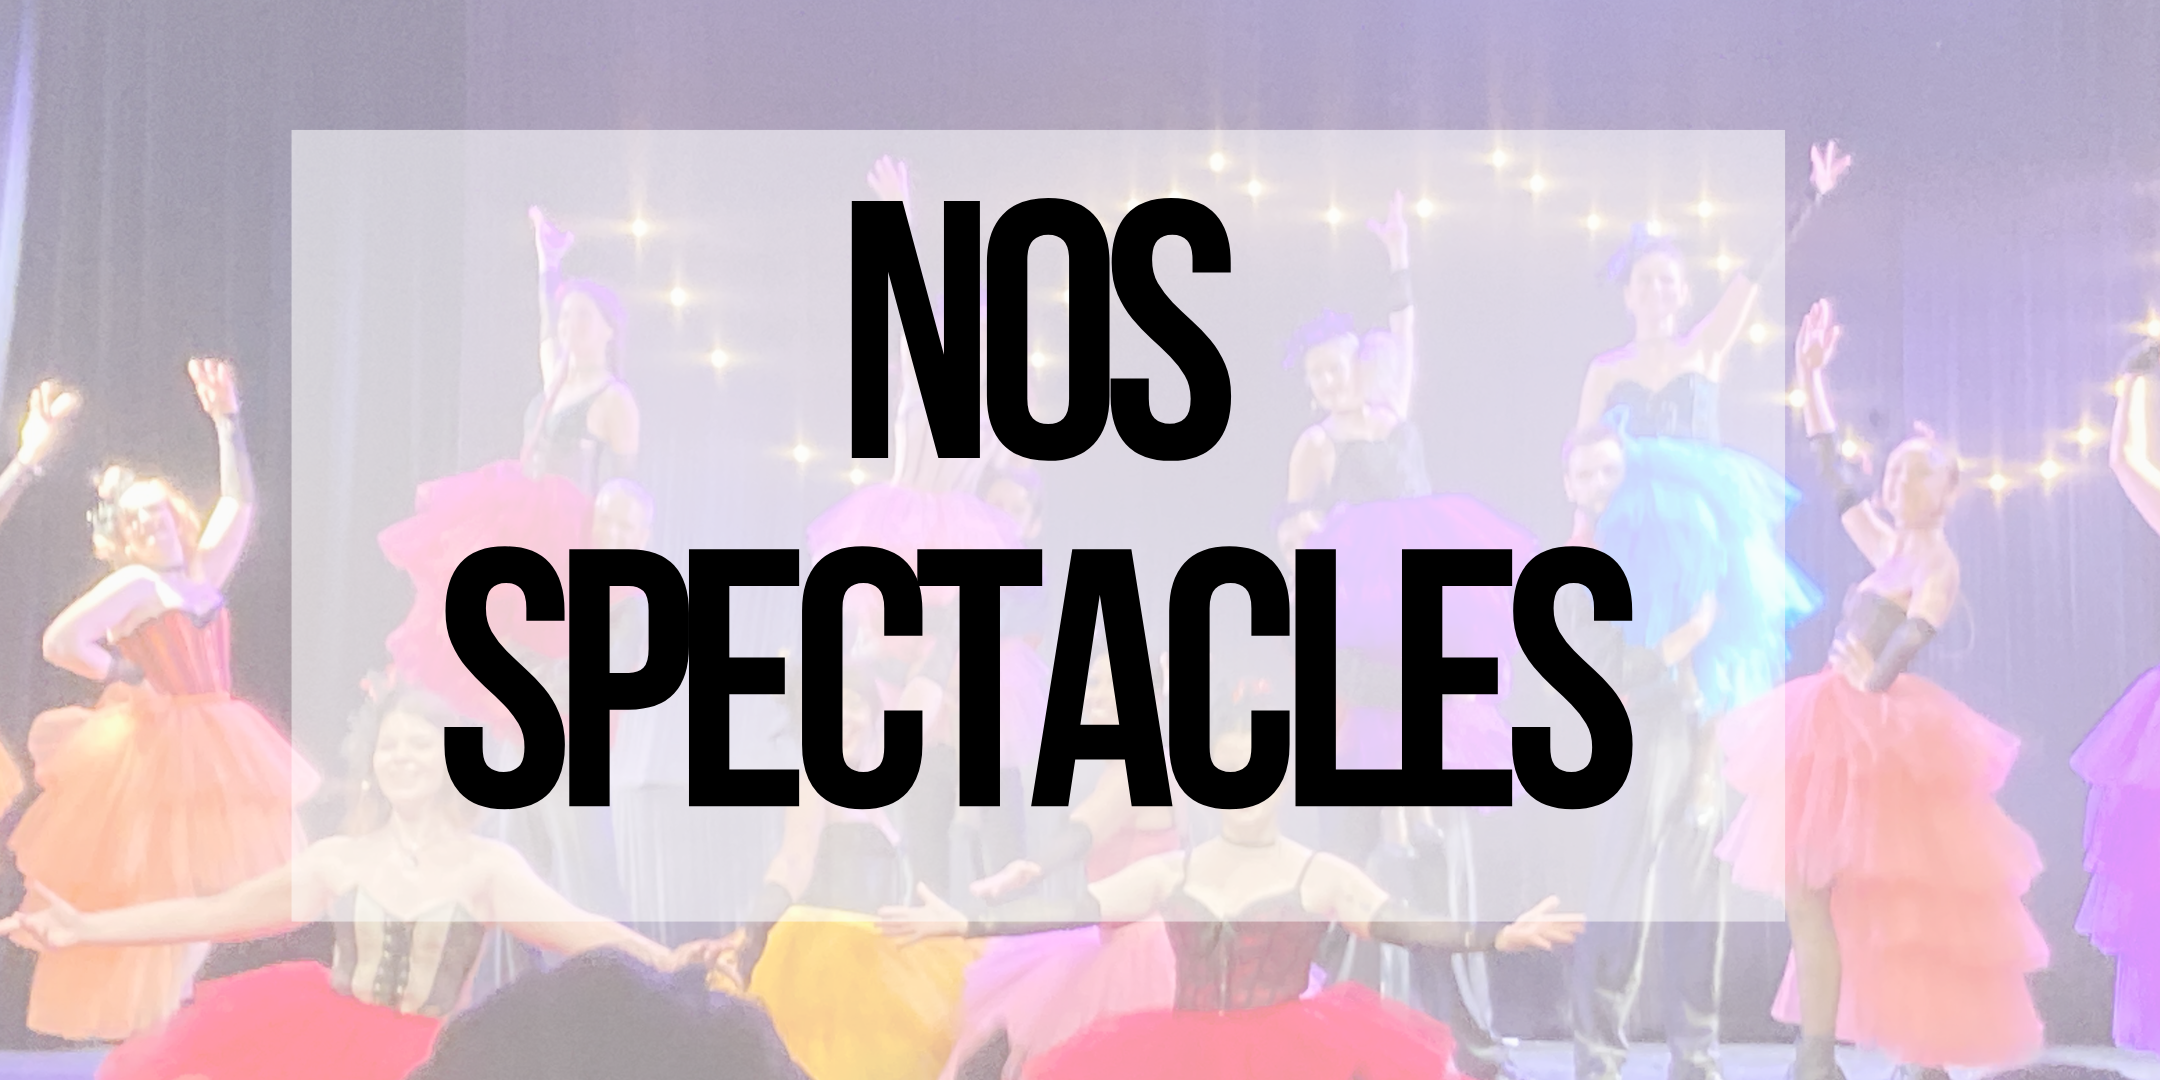 Nos spectacles